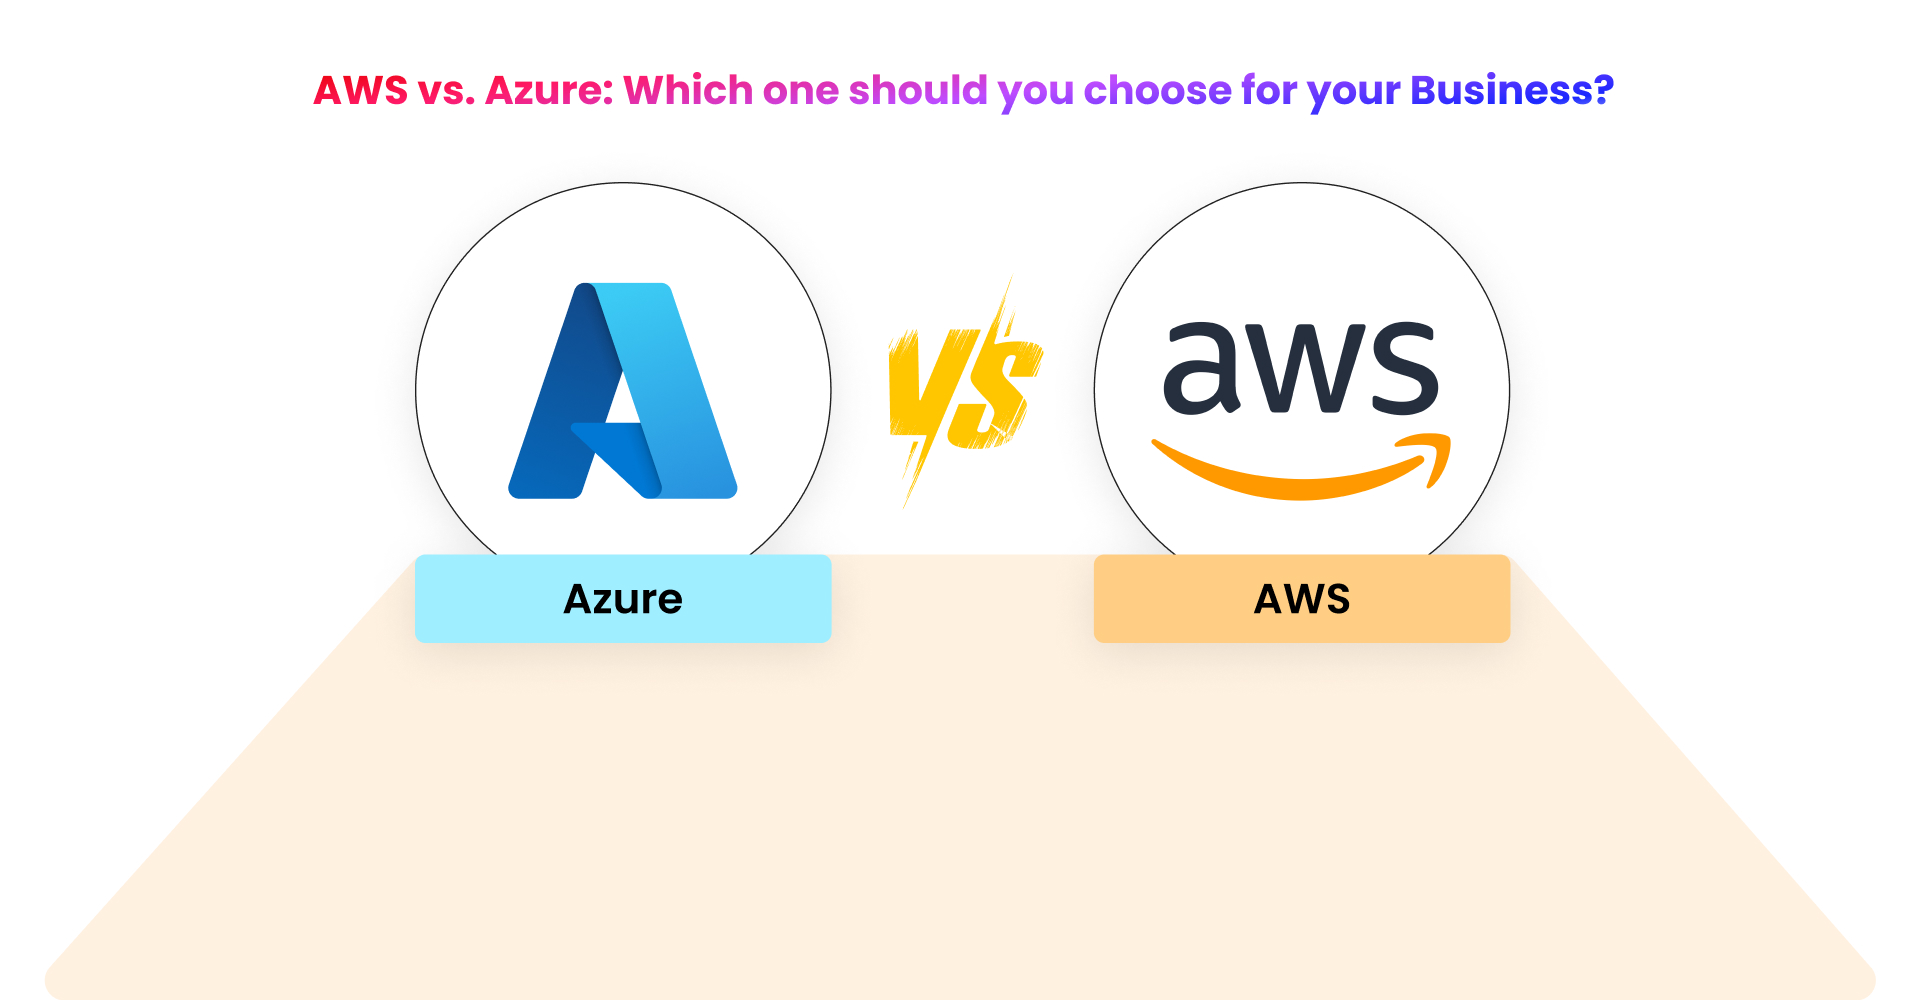 AWS vs. Azure: Which one should you choose for your Business?